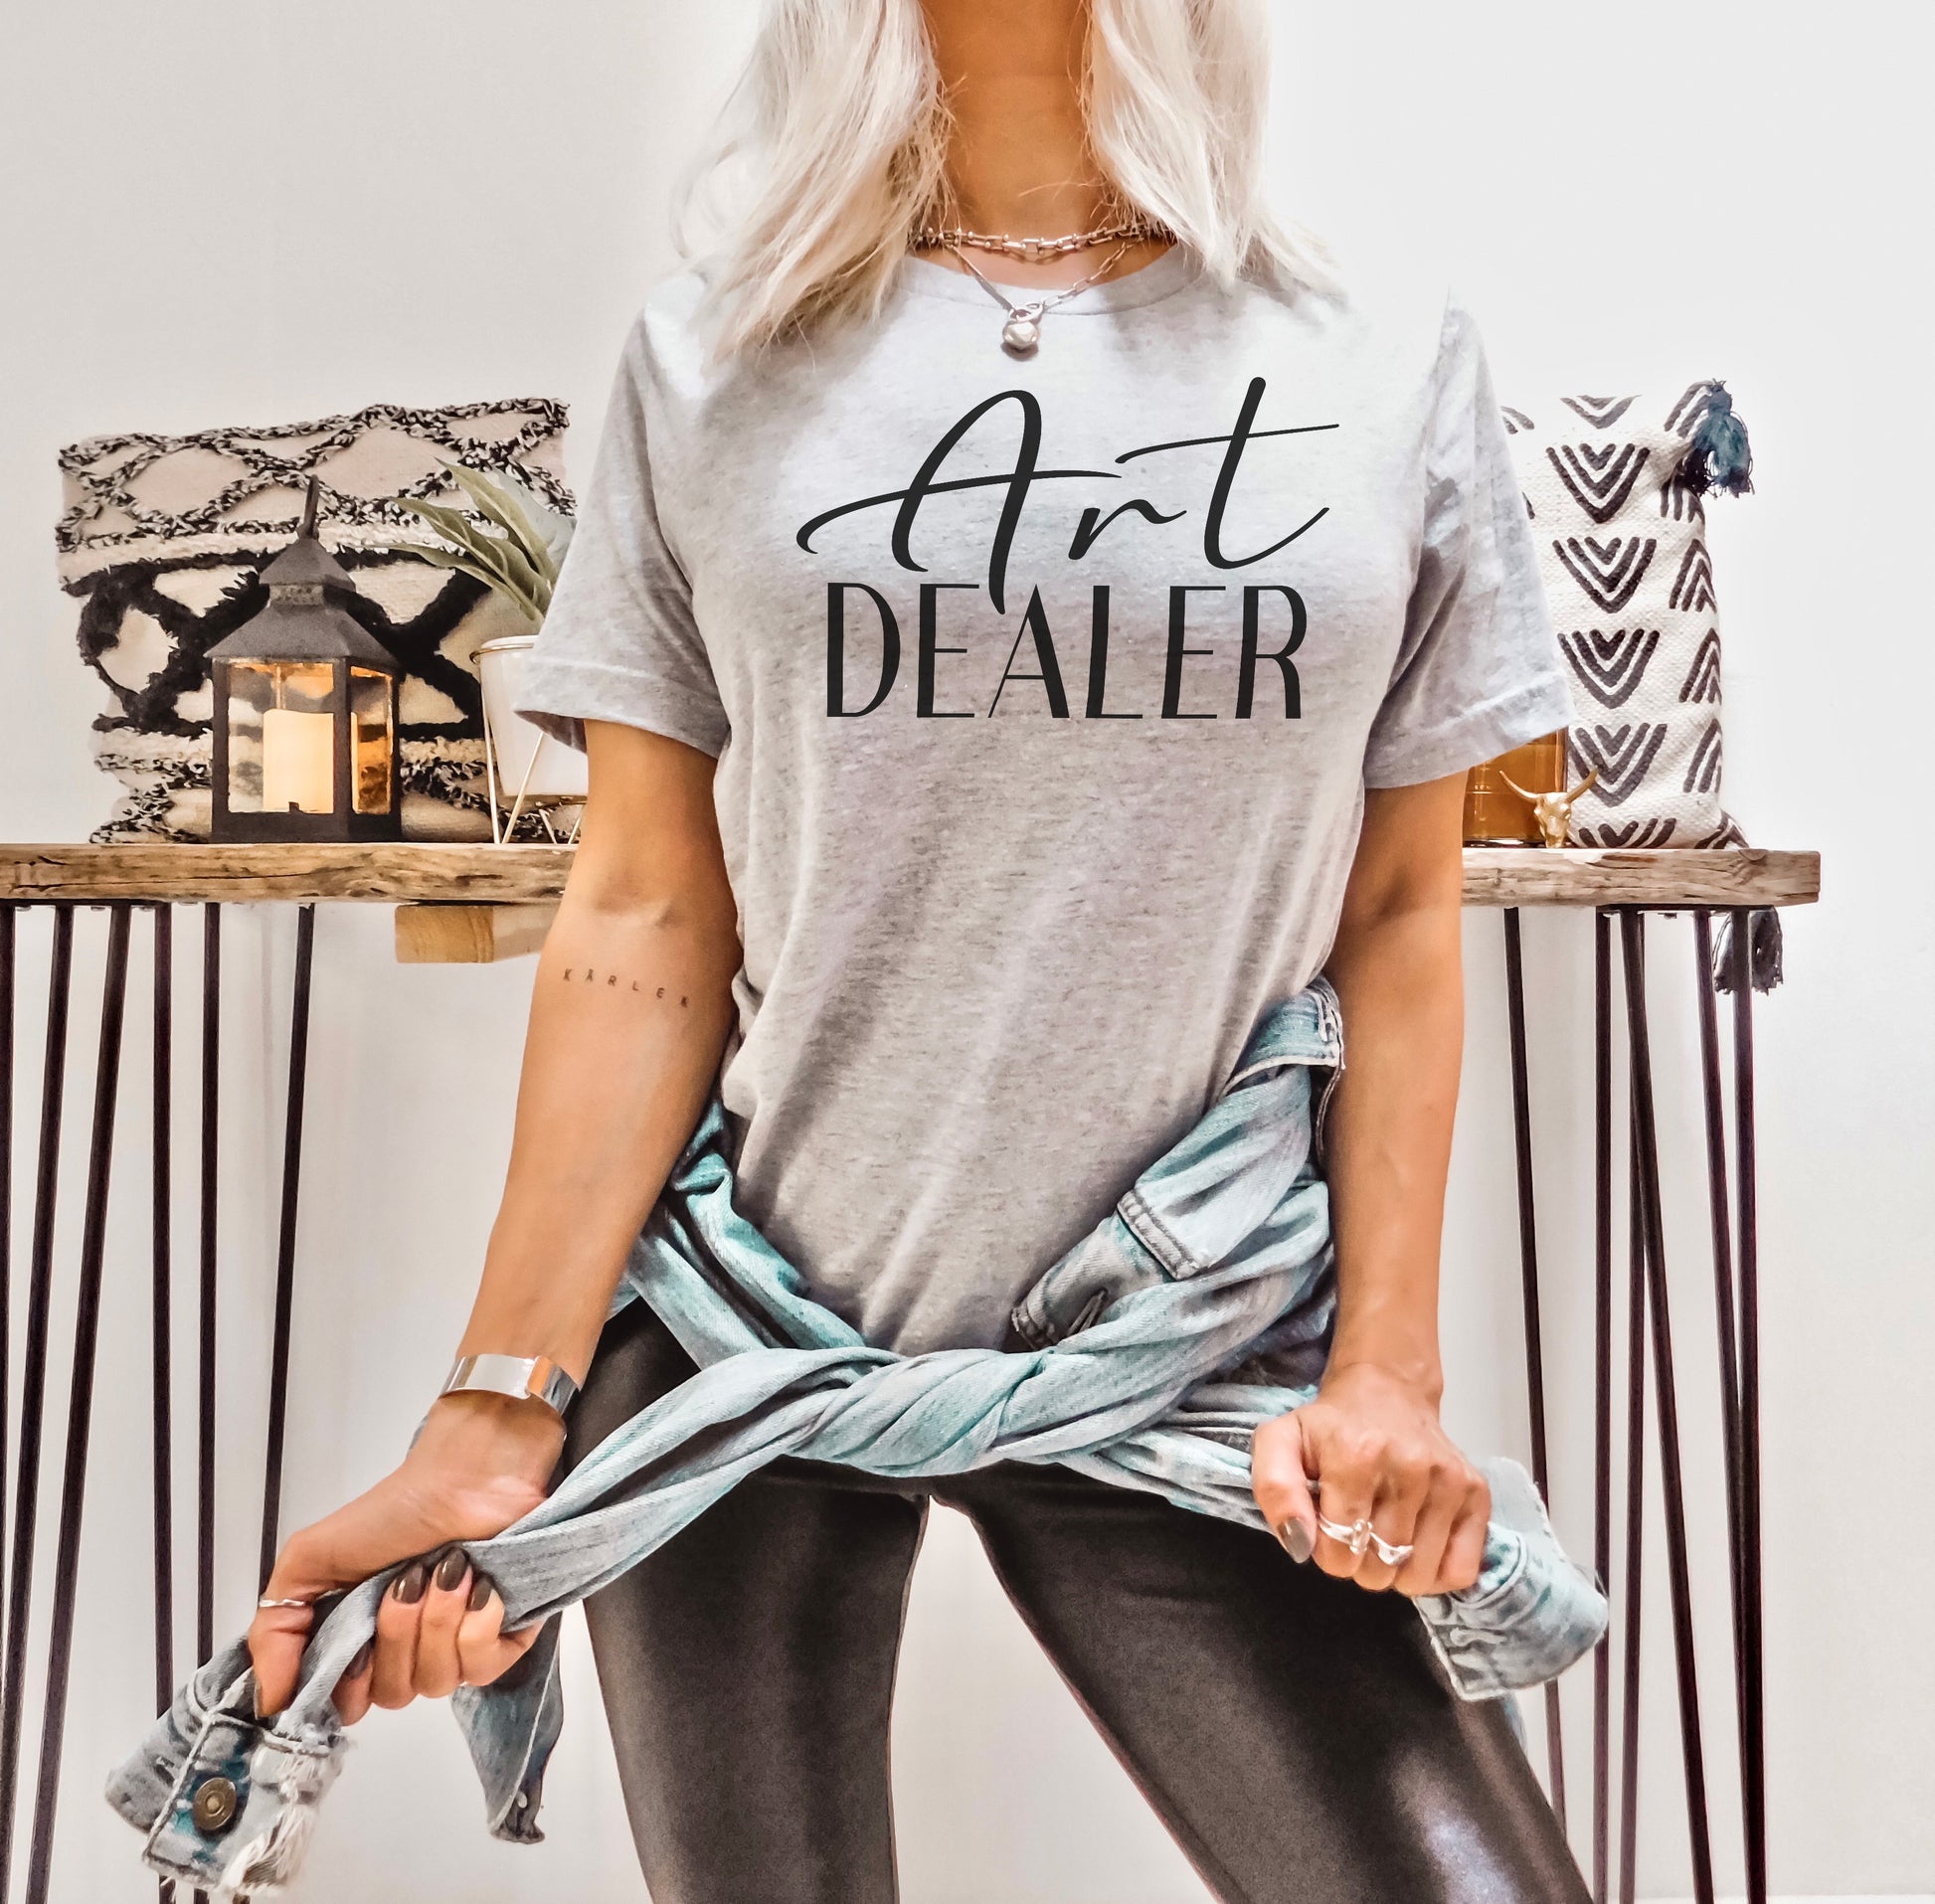 Designs by Prim Art Dealer Soft Unisex T-shirt |. Gallery Owner Sales Rep Artist Painting Dealer Abstract Gallery Expert Graphic Tee Top